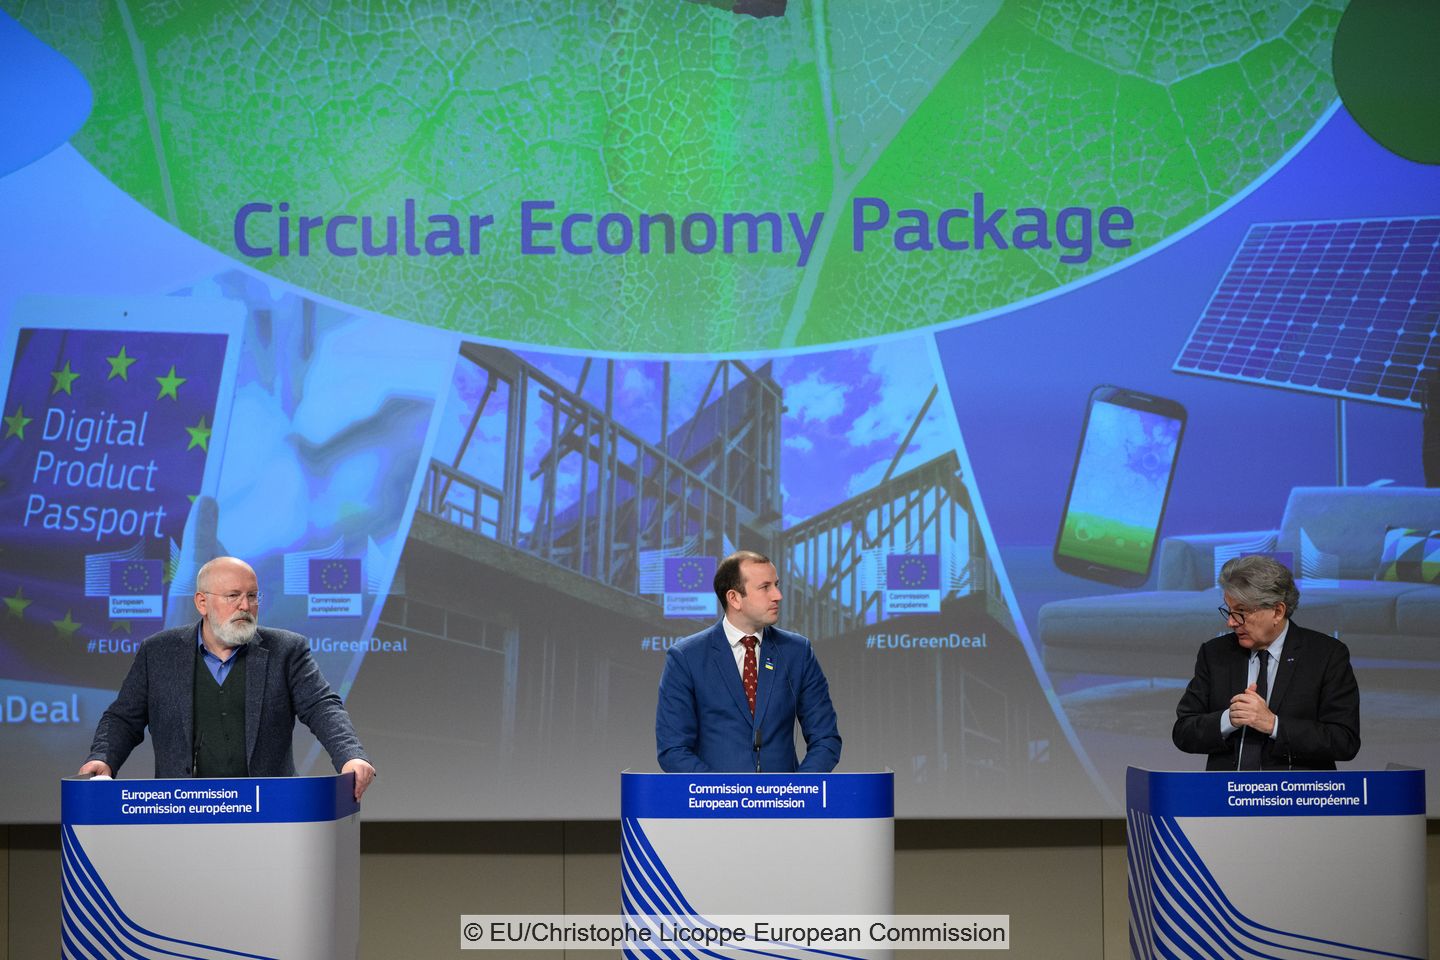 EU Commissioners Frans Timmermans, Virginius Sinkevicius and Thierry Breton presenting the circular economy package in Brussels.